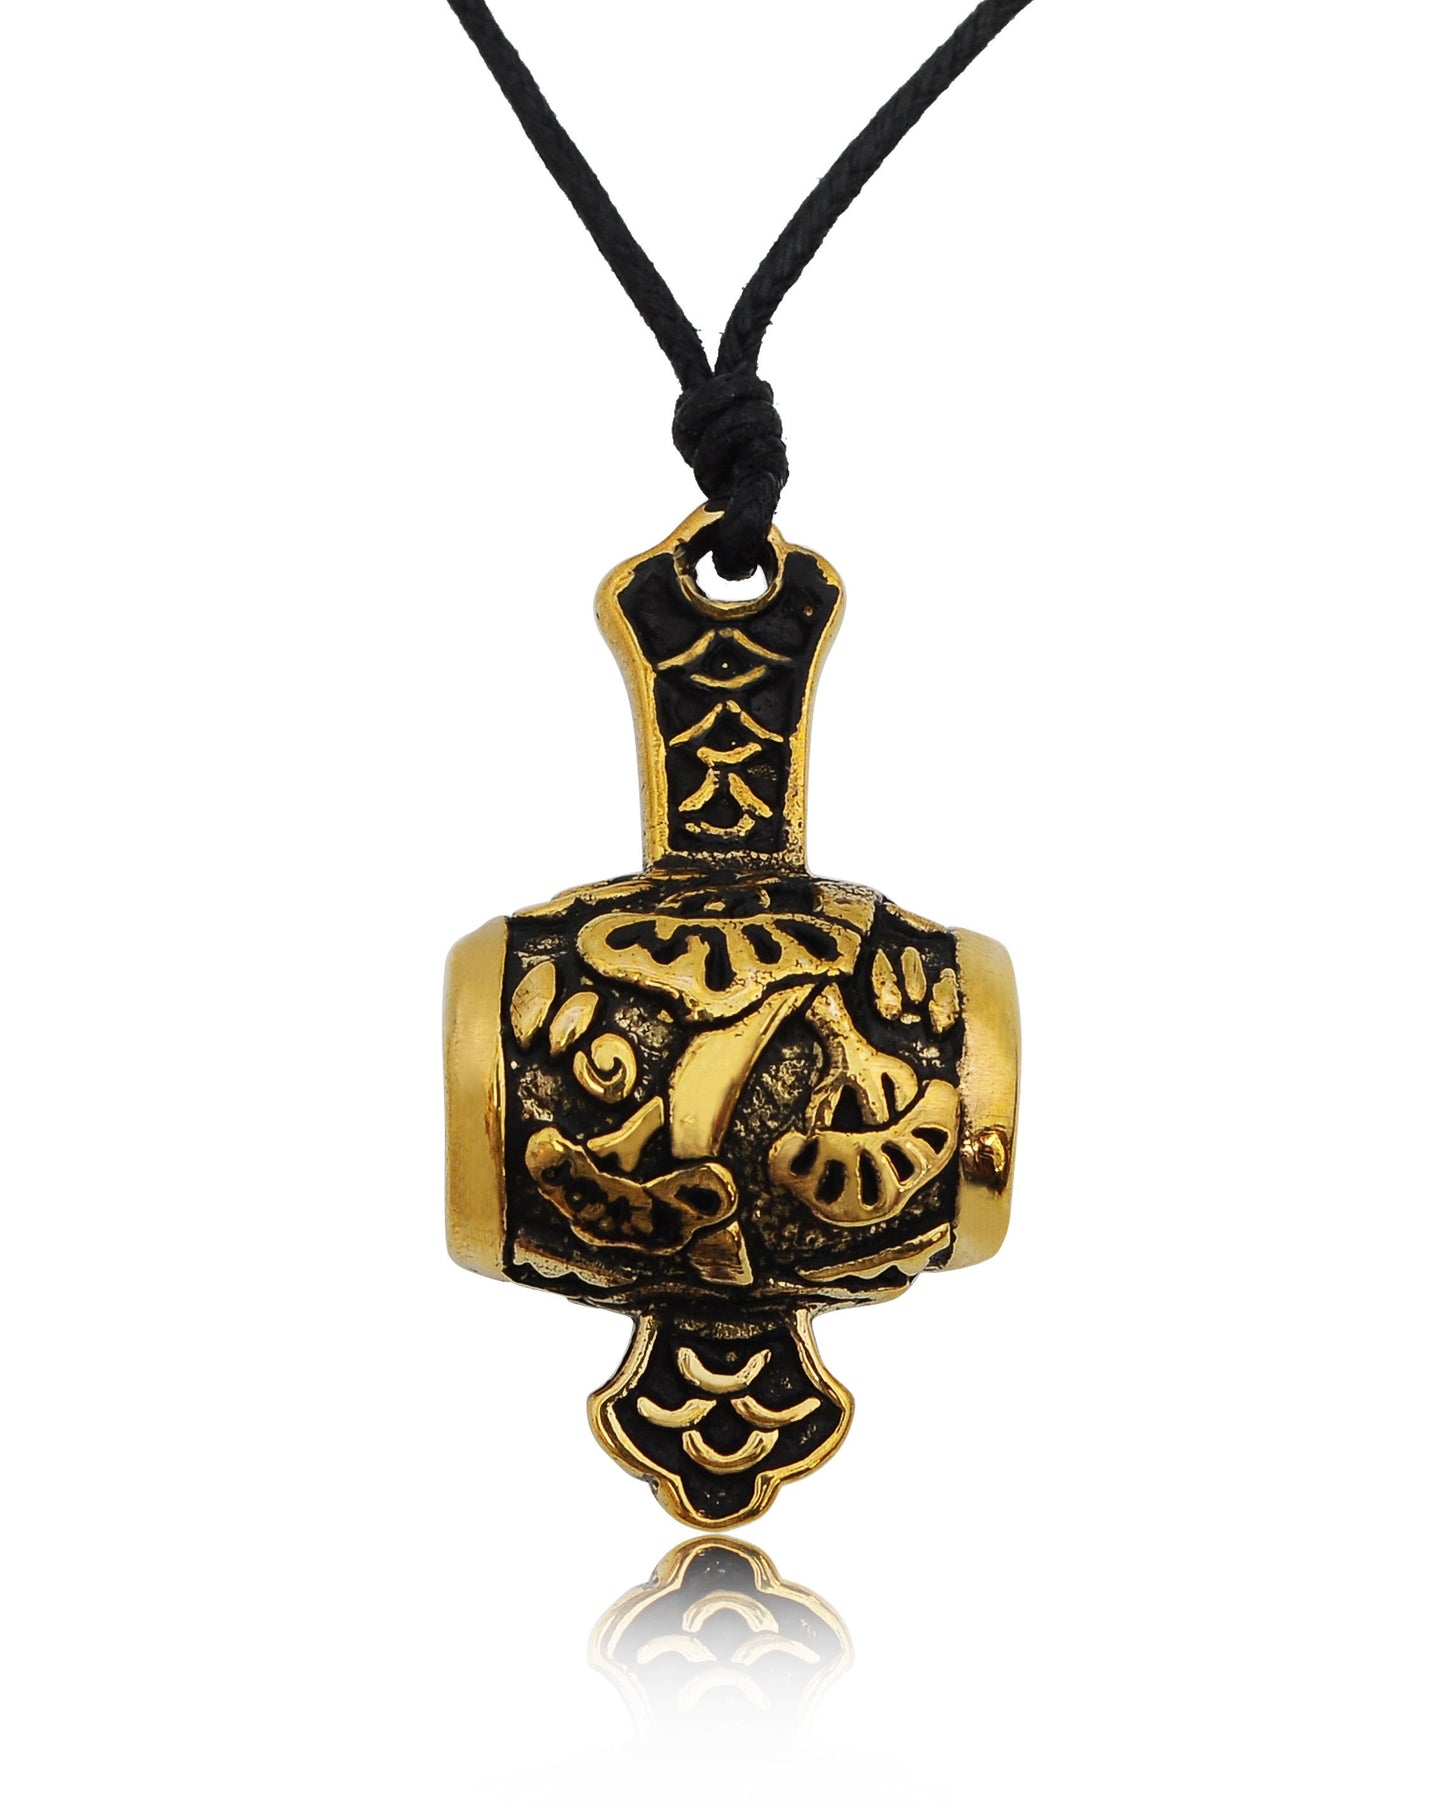 Stylish God Hammer Silver Pewter Gold Brass Charm Necklace Pendant Jewelry